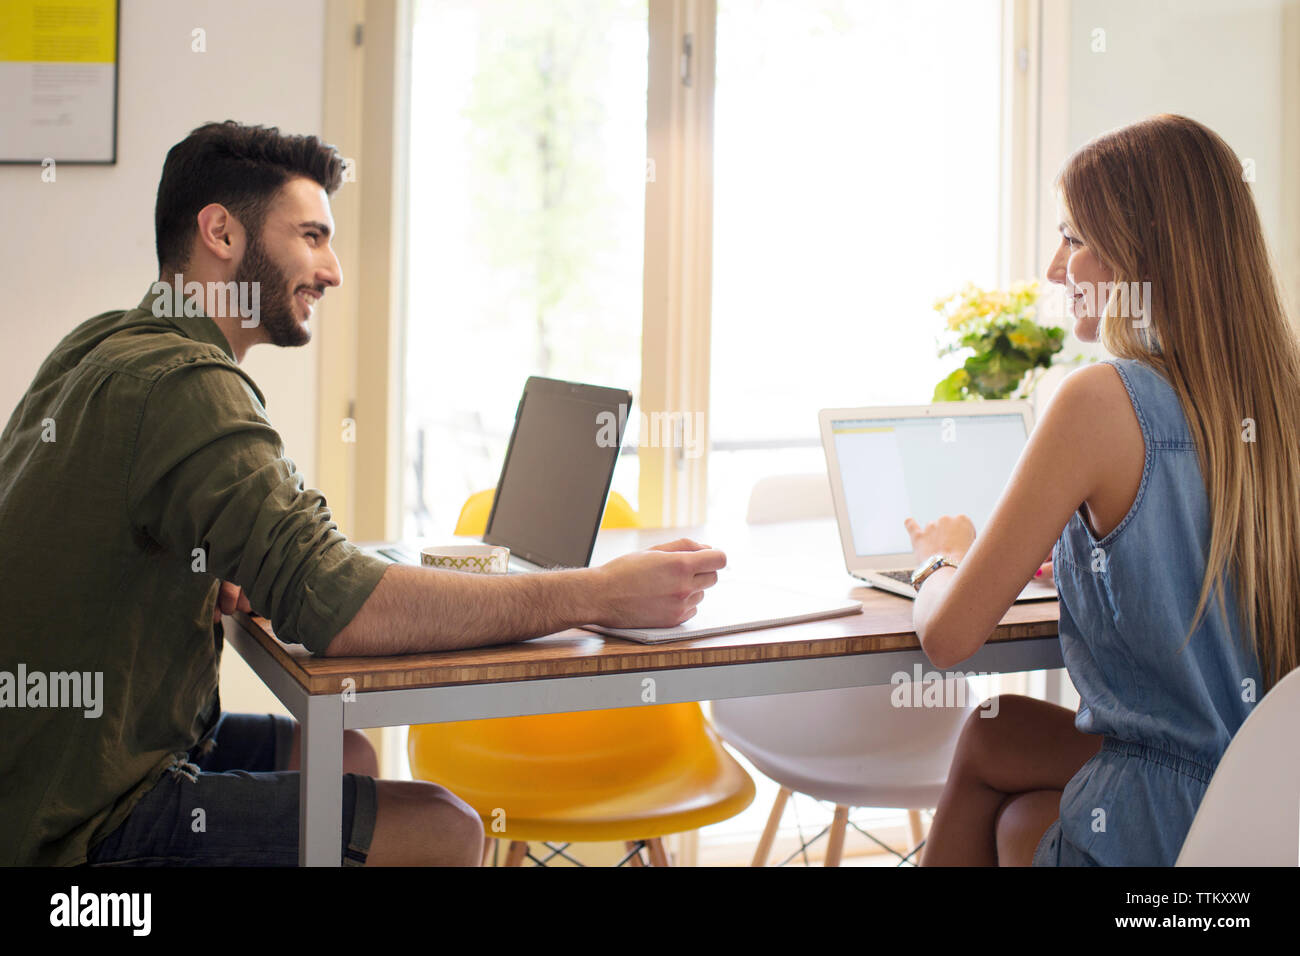 Couple using laptops at table in home Stock Photo